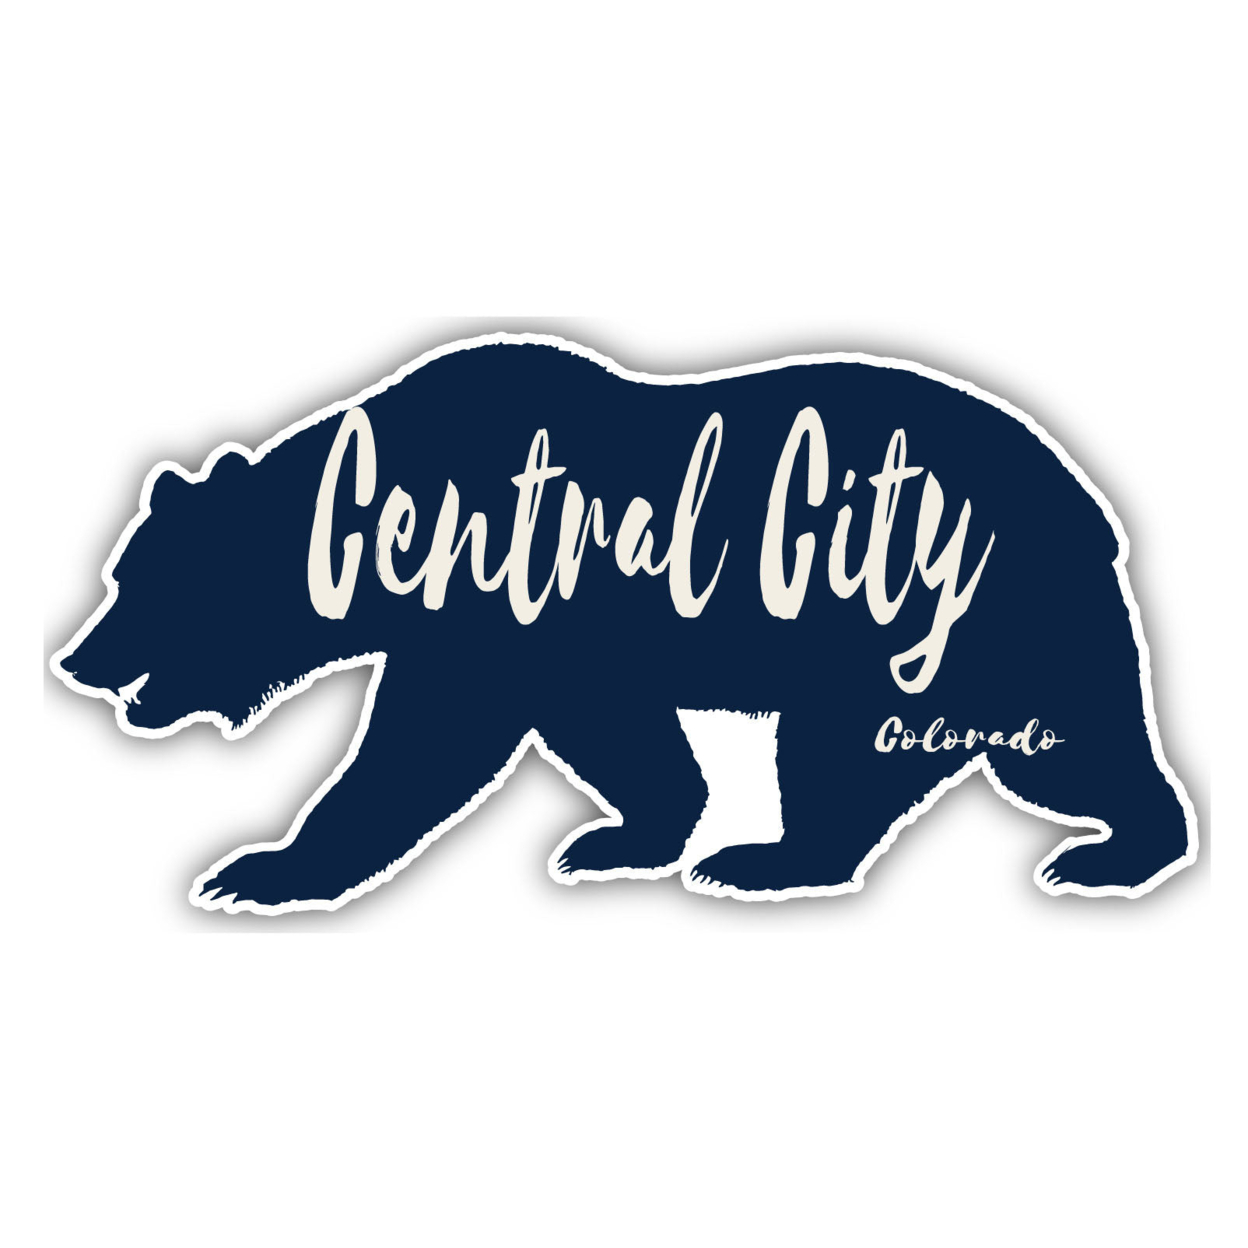 Central City Colorado Souvenir Decorative Stickers (Choose Theme And Size) - 4-Pack, 12-Inch, Camp Life